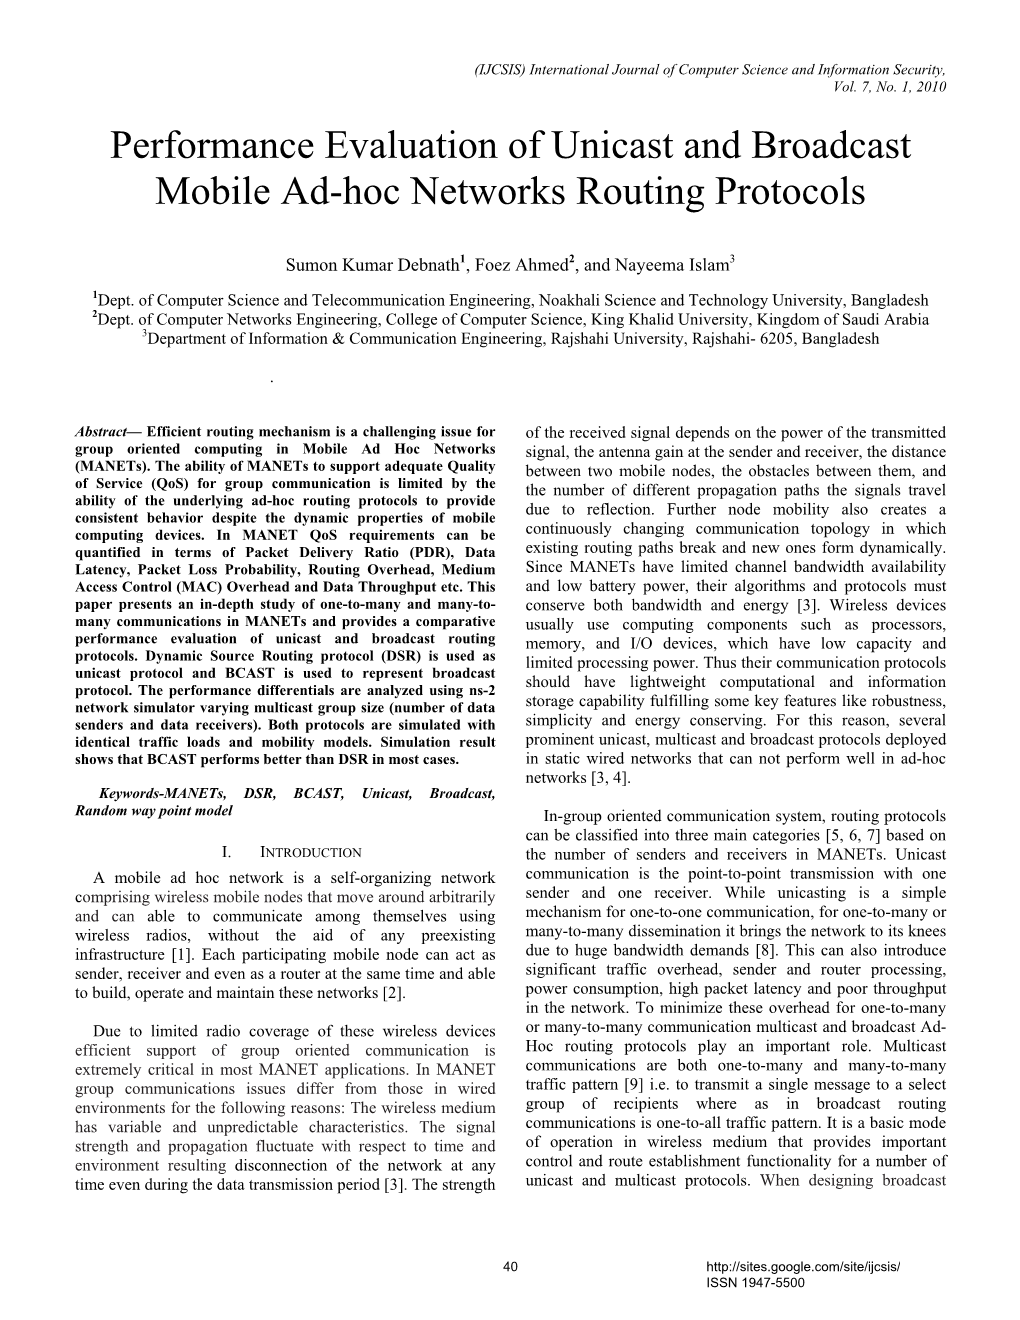 Performance Evaluation of Unicast and Broadcast Mobile Ad-Hoc Networks Routing Protocols